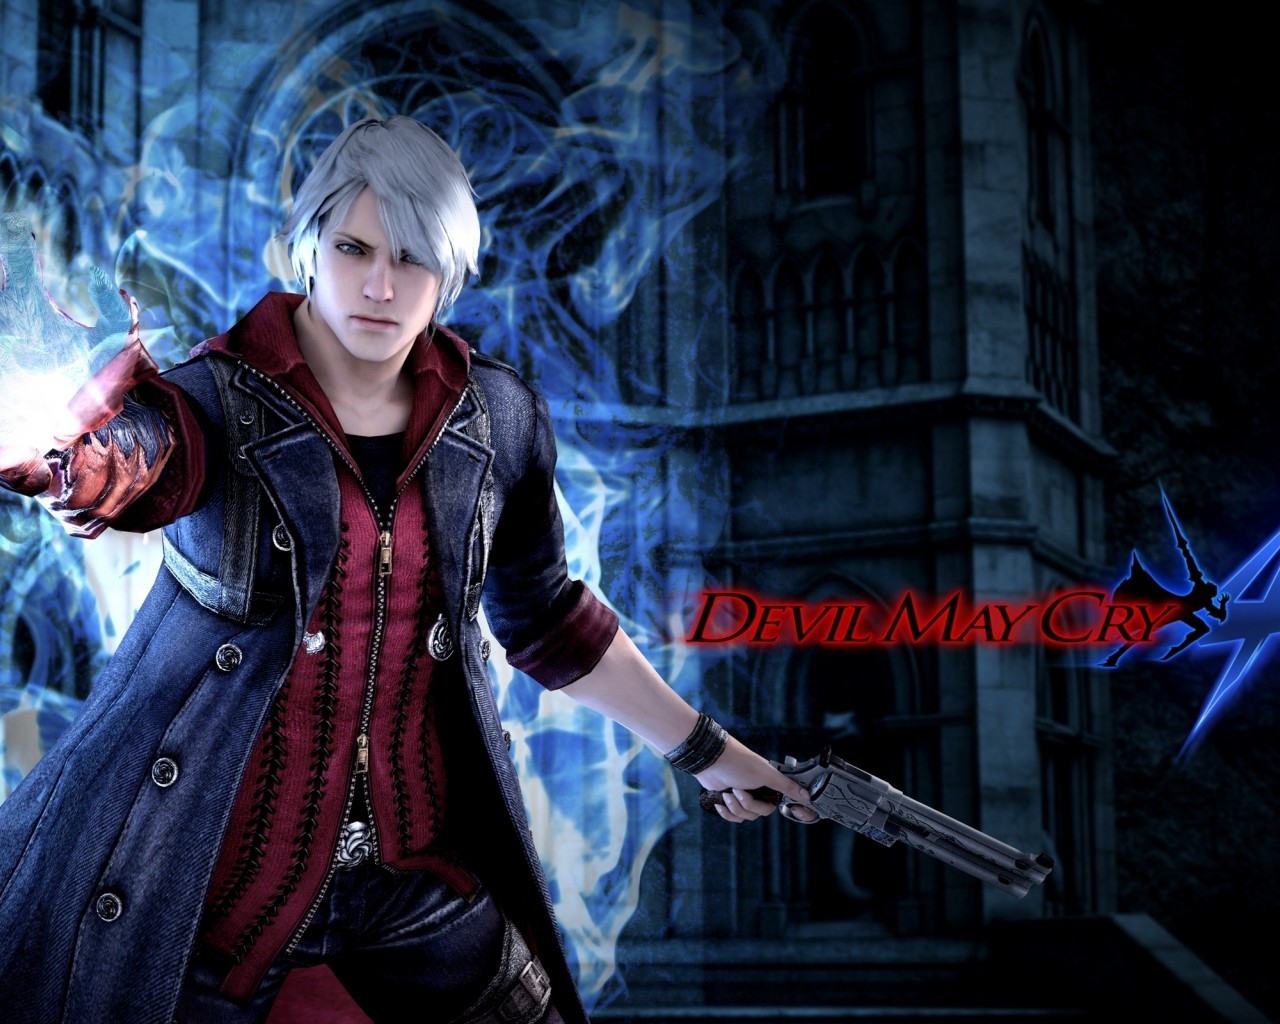 Devil May Cry 4 Poster for 1280 x 1024 resolution